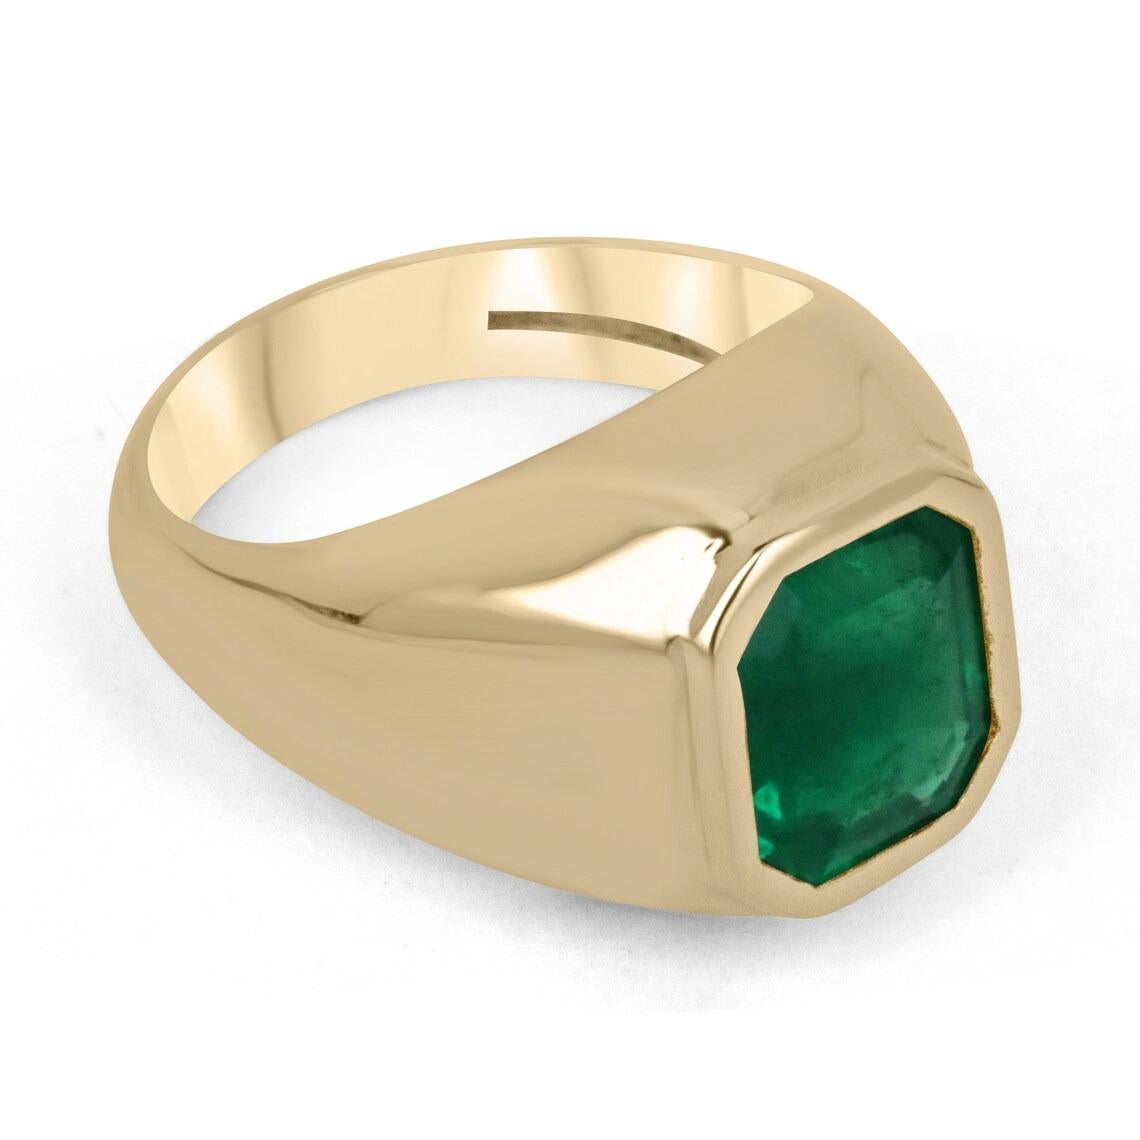 A remarkable AAA emerald BOLD solitaire hand-crafted ring masterpiece. This dapper piece features a spectacular 2.90-carat, fine rare Colombian emerald that displays the most outstanding rich, vivid, dark green color with excellent qualities. Very